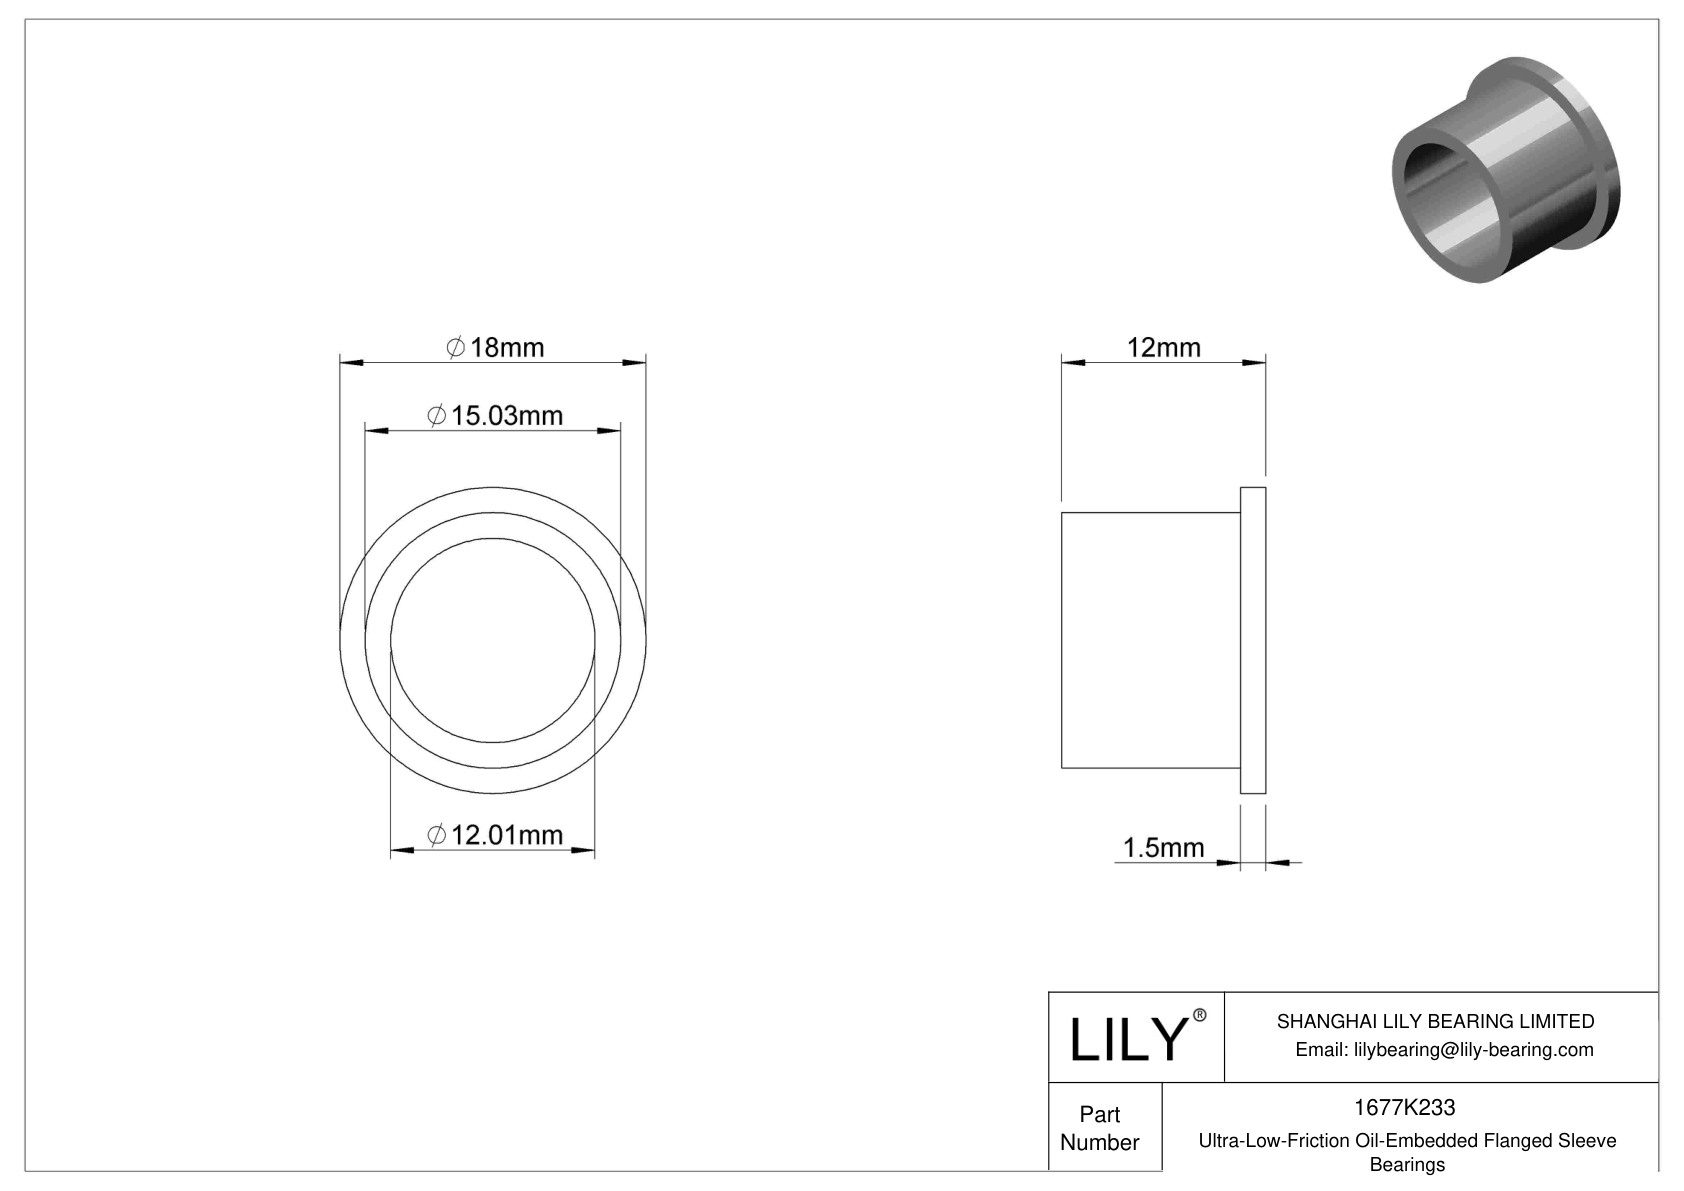 BGHHKCDD Ultra-Low-Friction Oil-Embedded Flanged Sleeve Bearings cad drawing